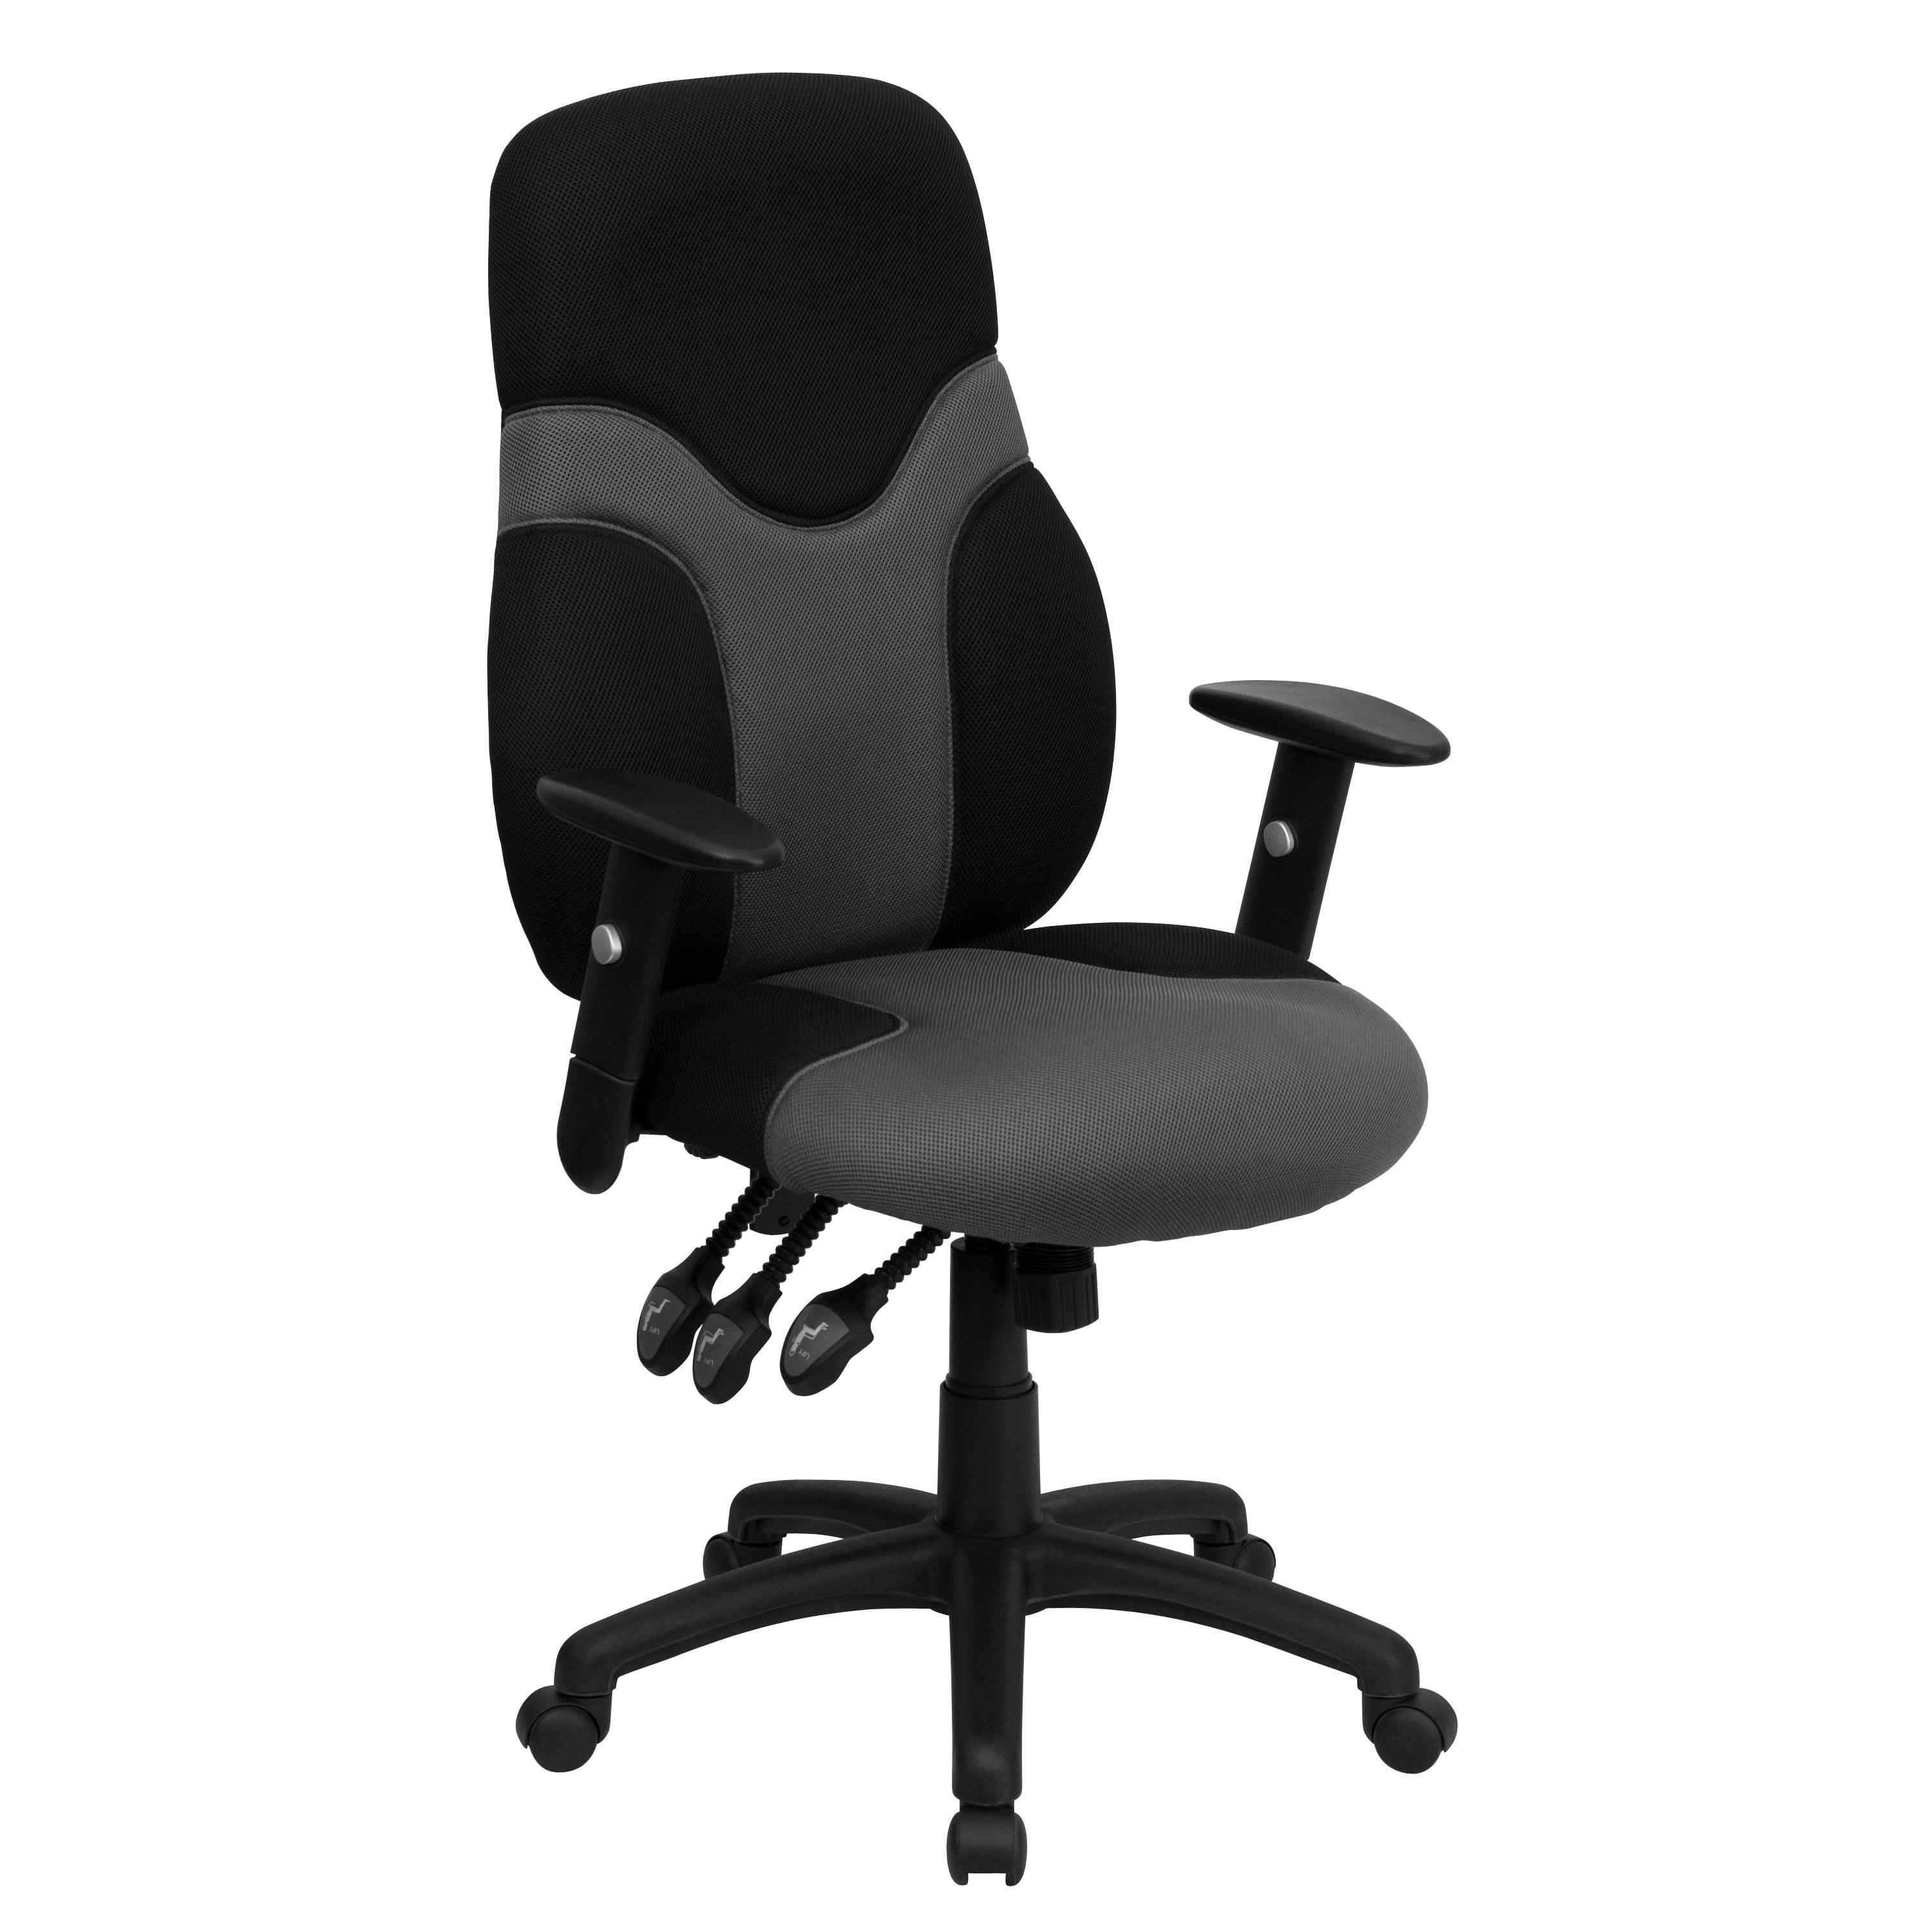 High-Back Ergonomic Black and Gray Mesh Swivel Task Chair with Adjustable Arms